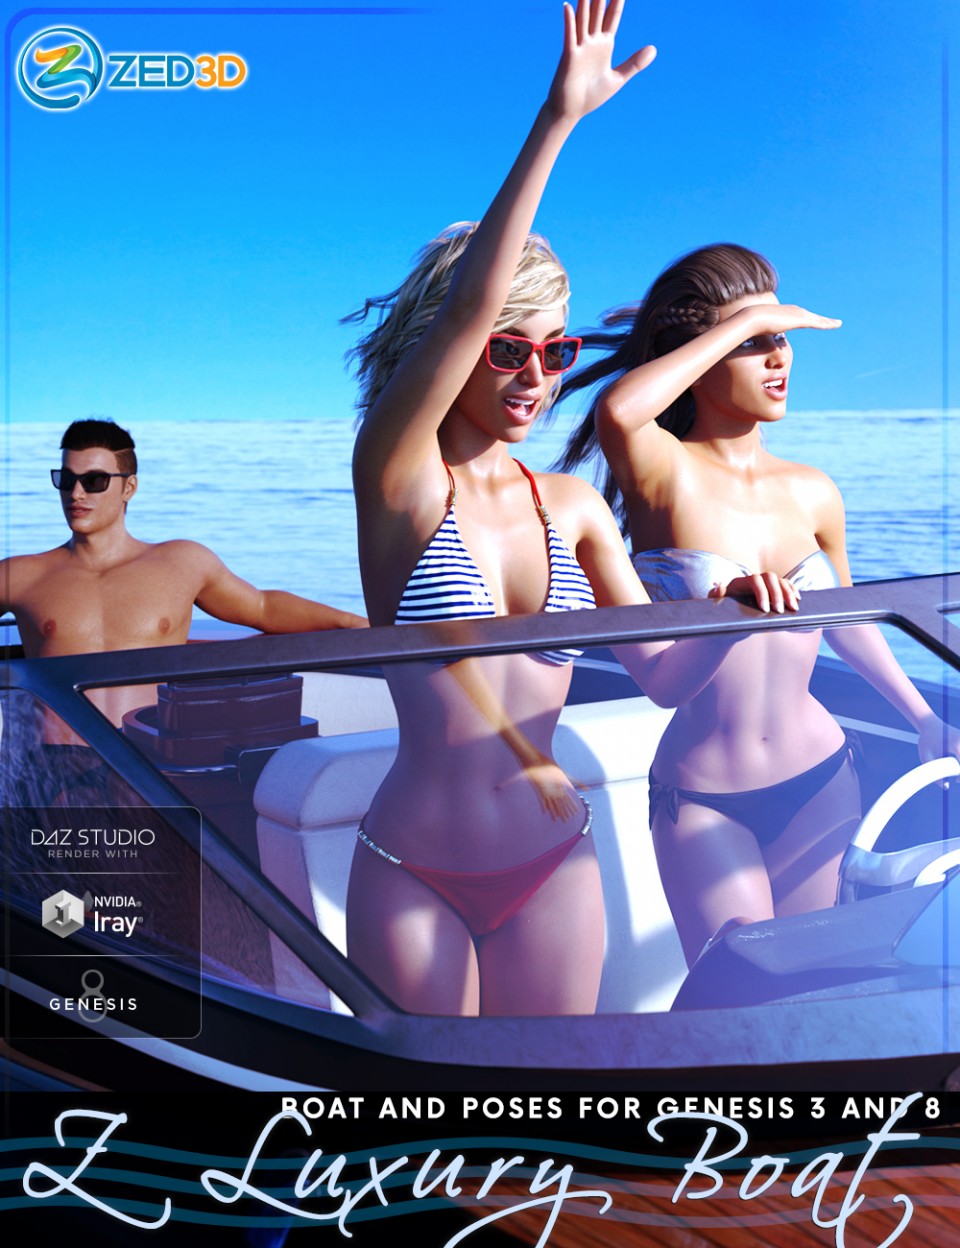 Z Luxury Boat and Poses for Genesis 3 and 8_DAZ3DDL